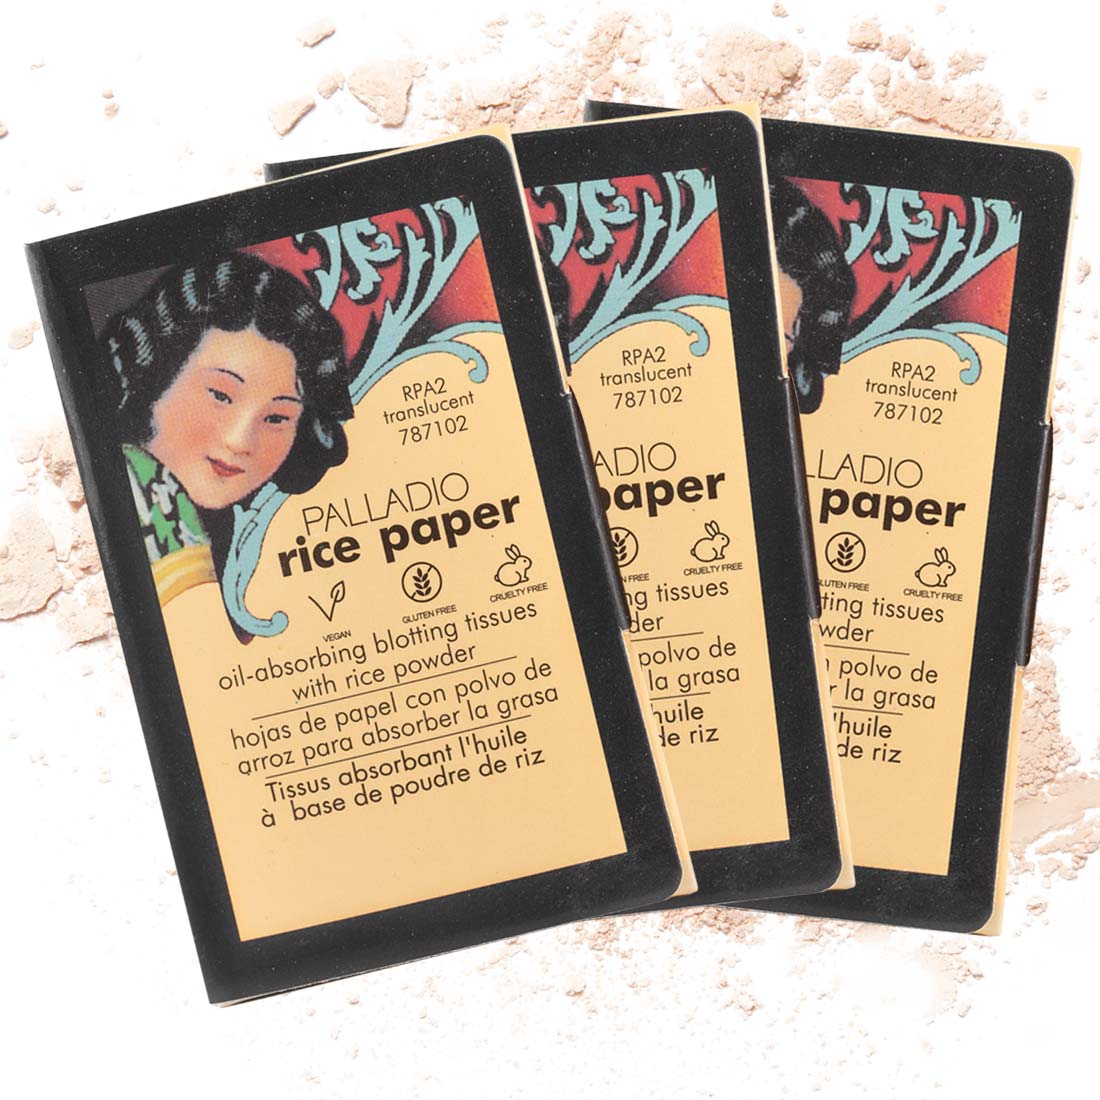 Palladio Rice Paper Tissues Translucent 40 Sheets (Pack of 6) Face Blotting Shee